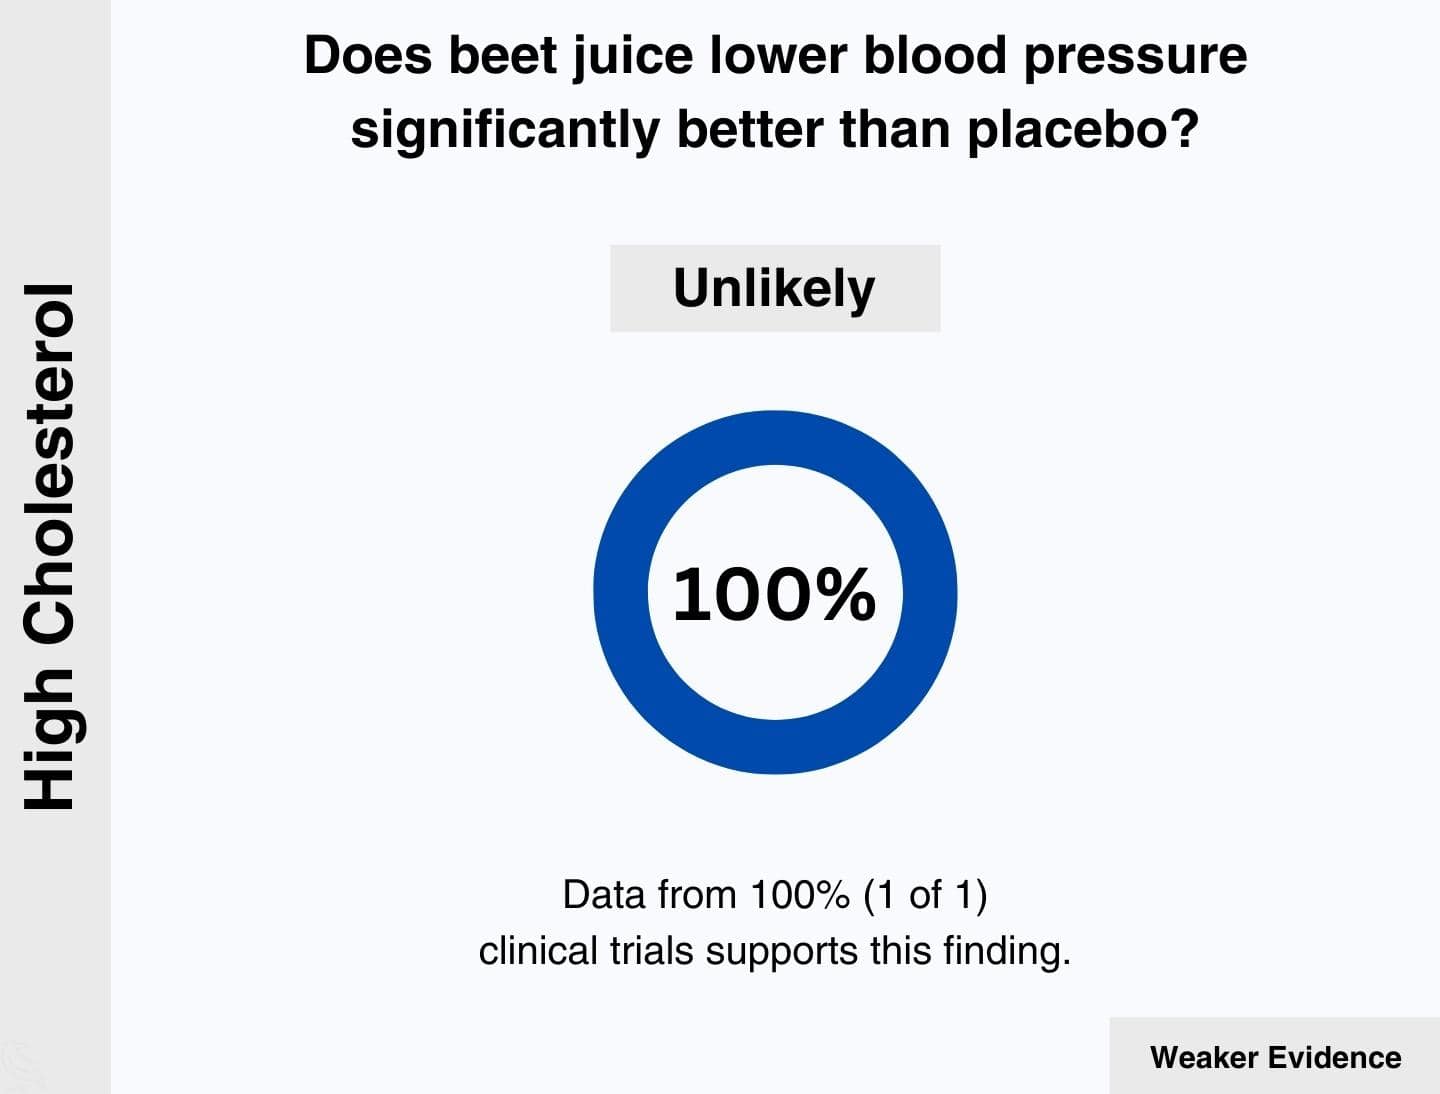 High cholesterol: 100% of relevant clinical trials agree that beet juice is unlikely to lower blood pressure significantly better than placebo.